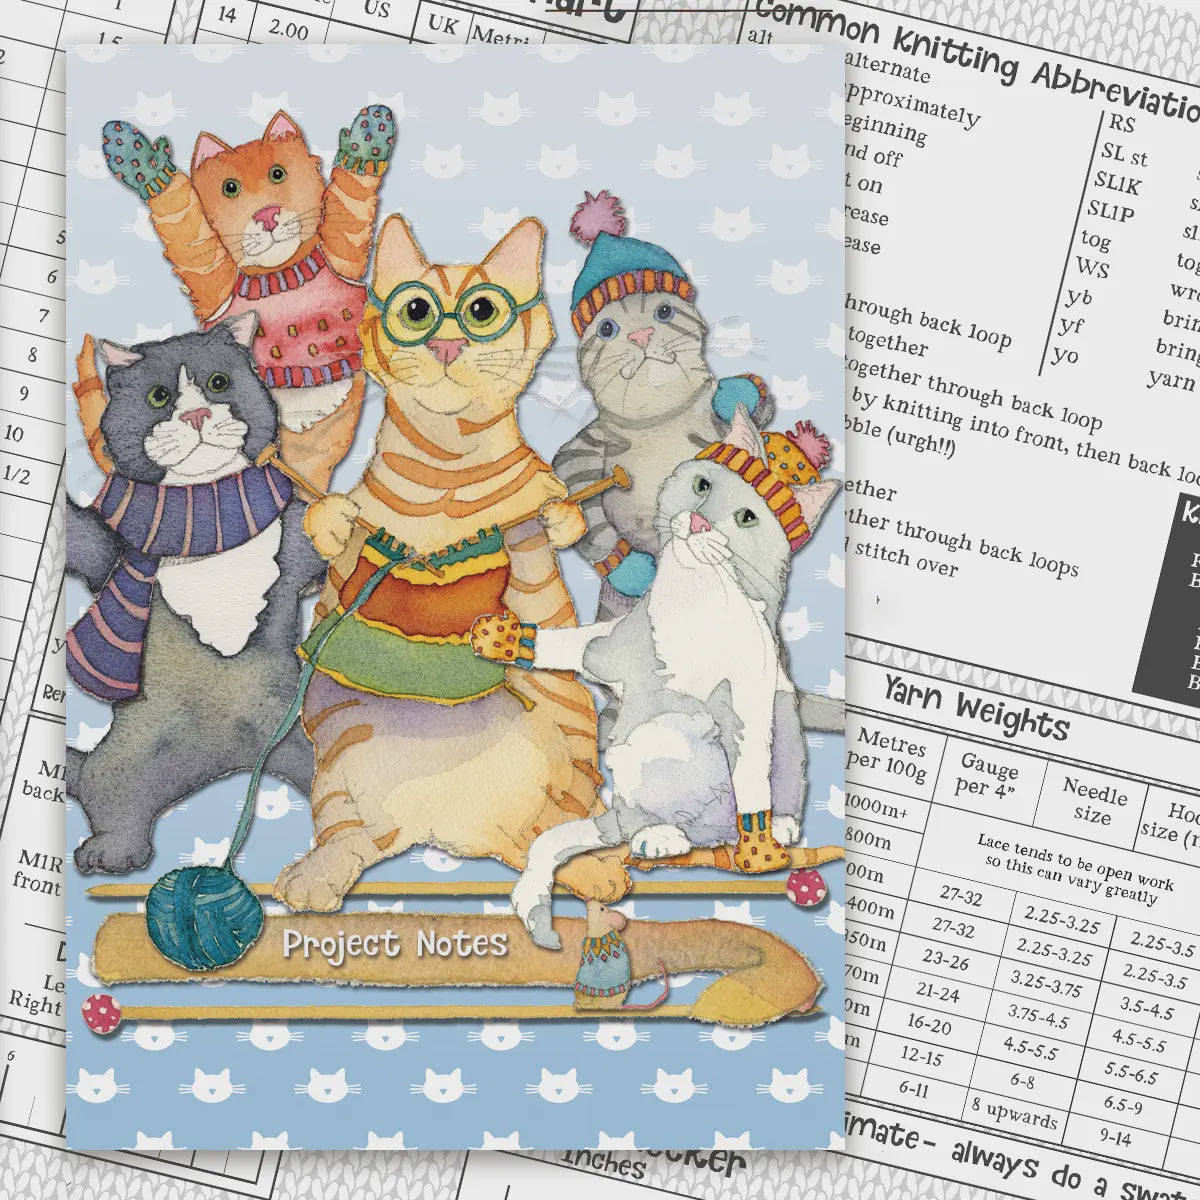 KITTENS IN MITTENS - Knitting Jotter/Project Notes